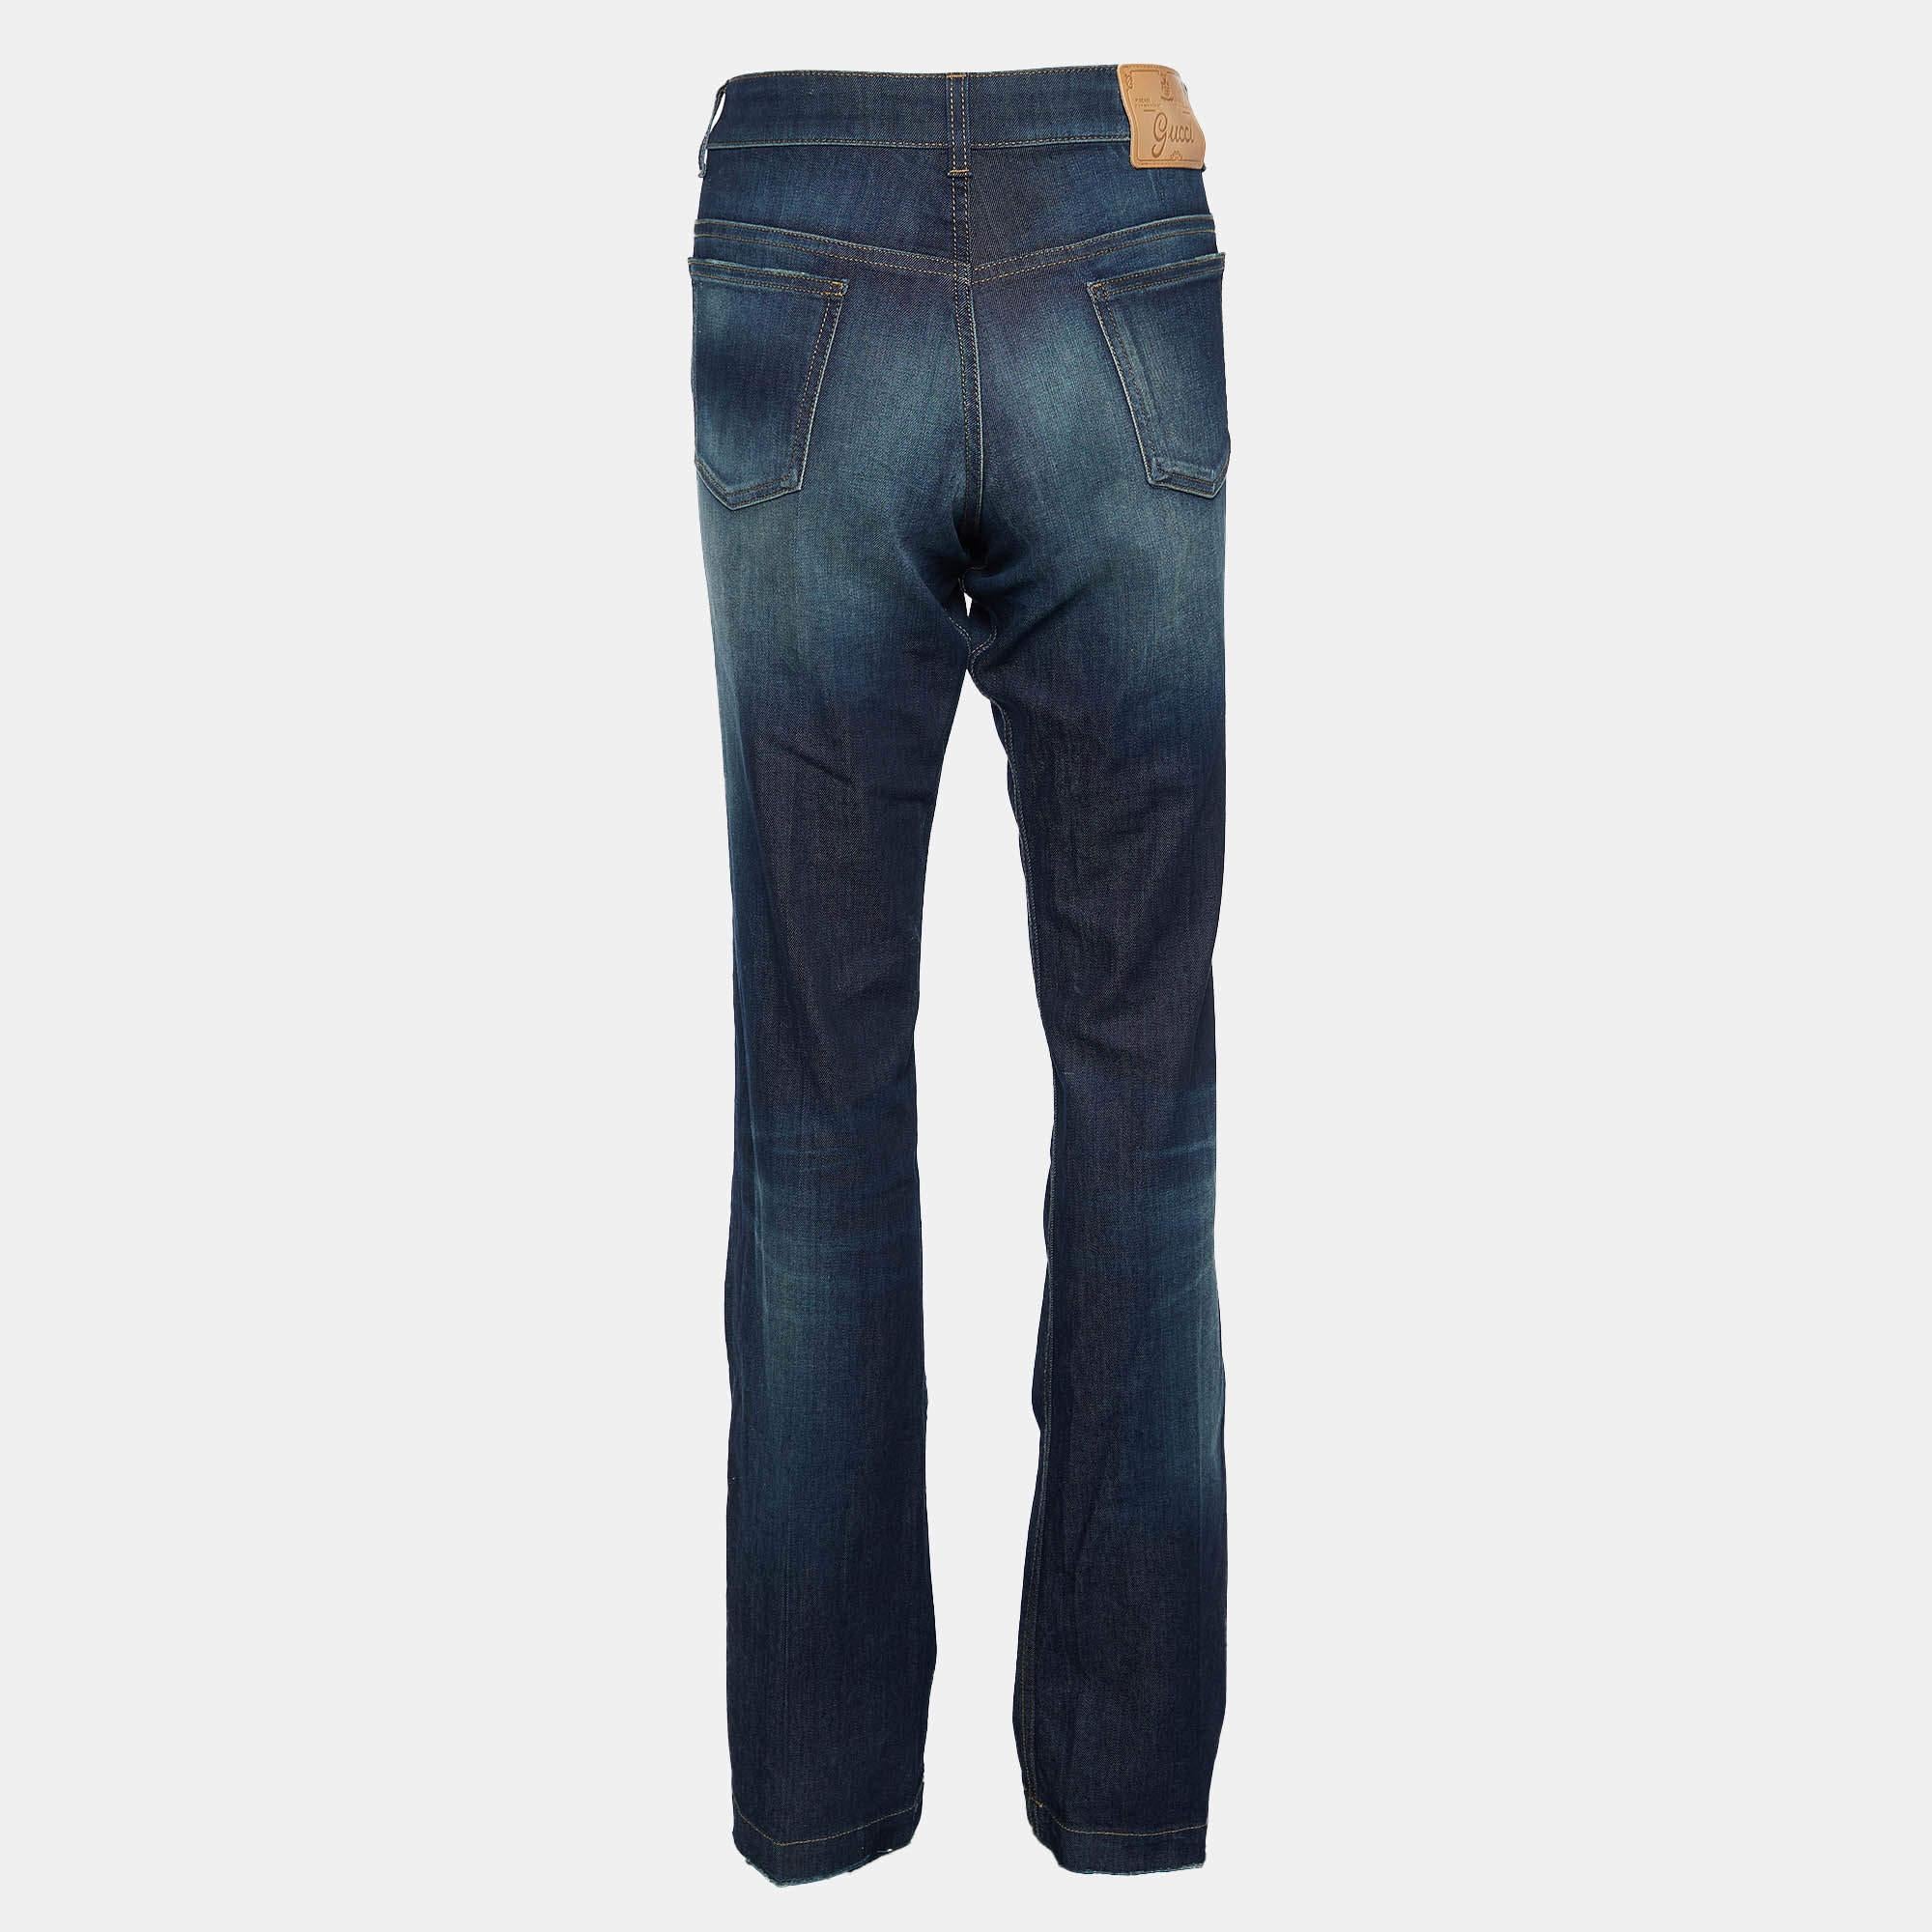 A good pair of jeans always makes the closet complete. This pair of jeans is tailored with such skill and style that it will be your favorite in no time. It will give you a comfortable, stylish fit.

Includes: Price Tag